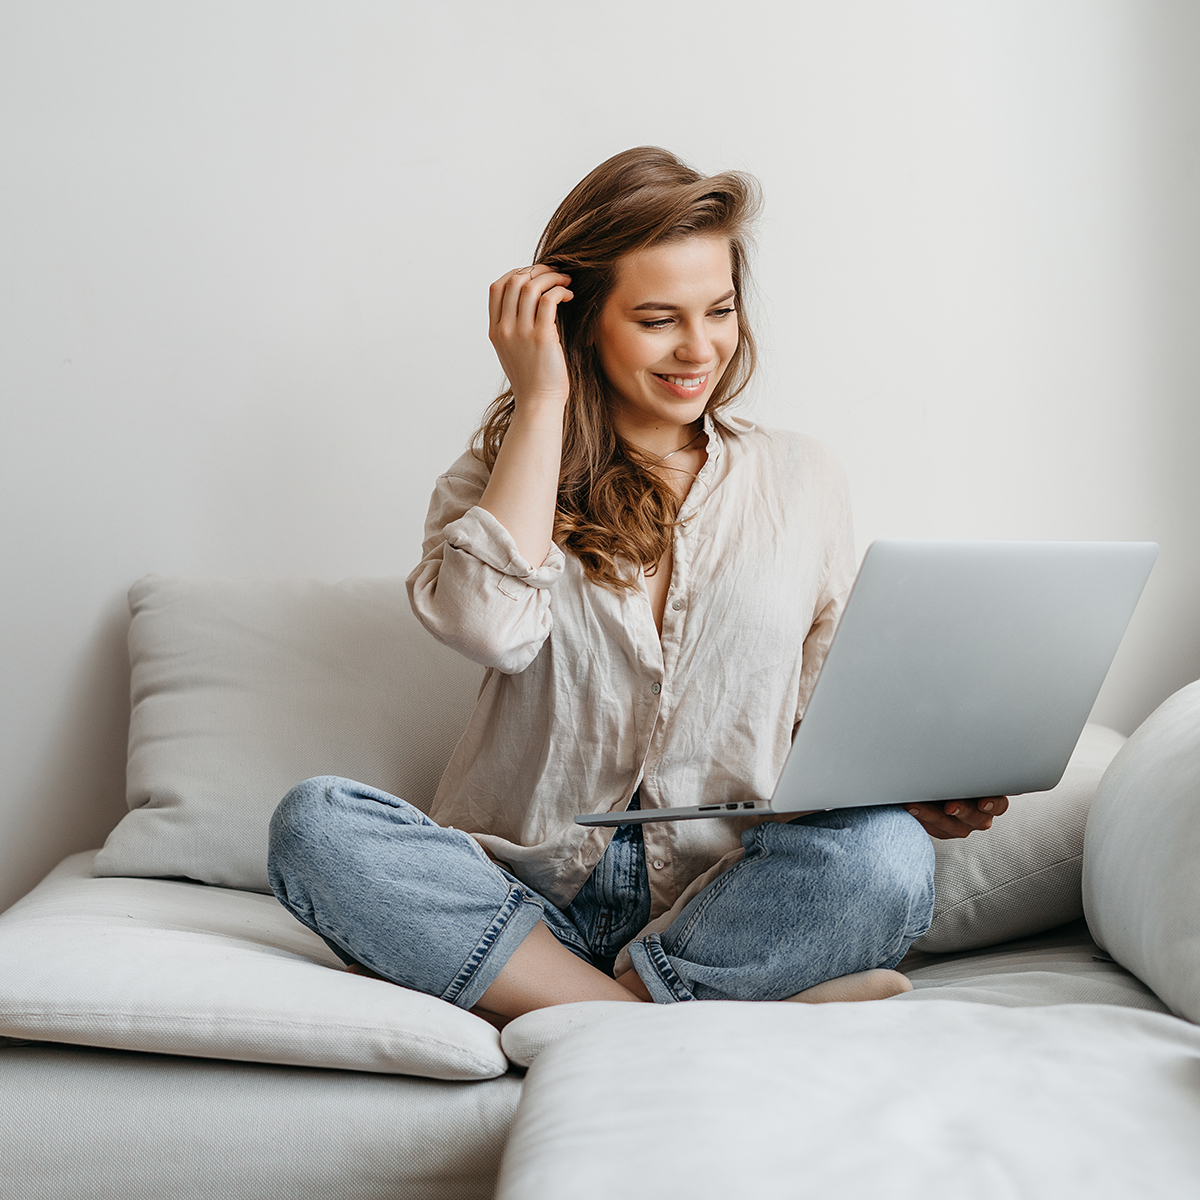 Woman sitting on a grey sofa smiling, working on her laptop.